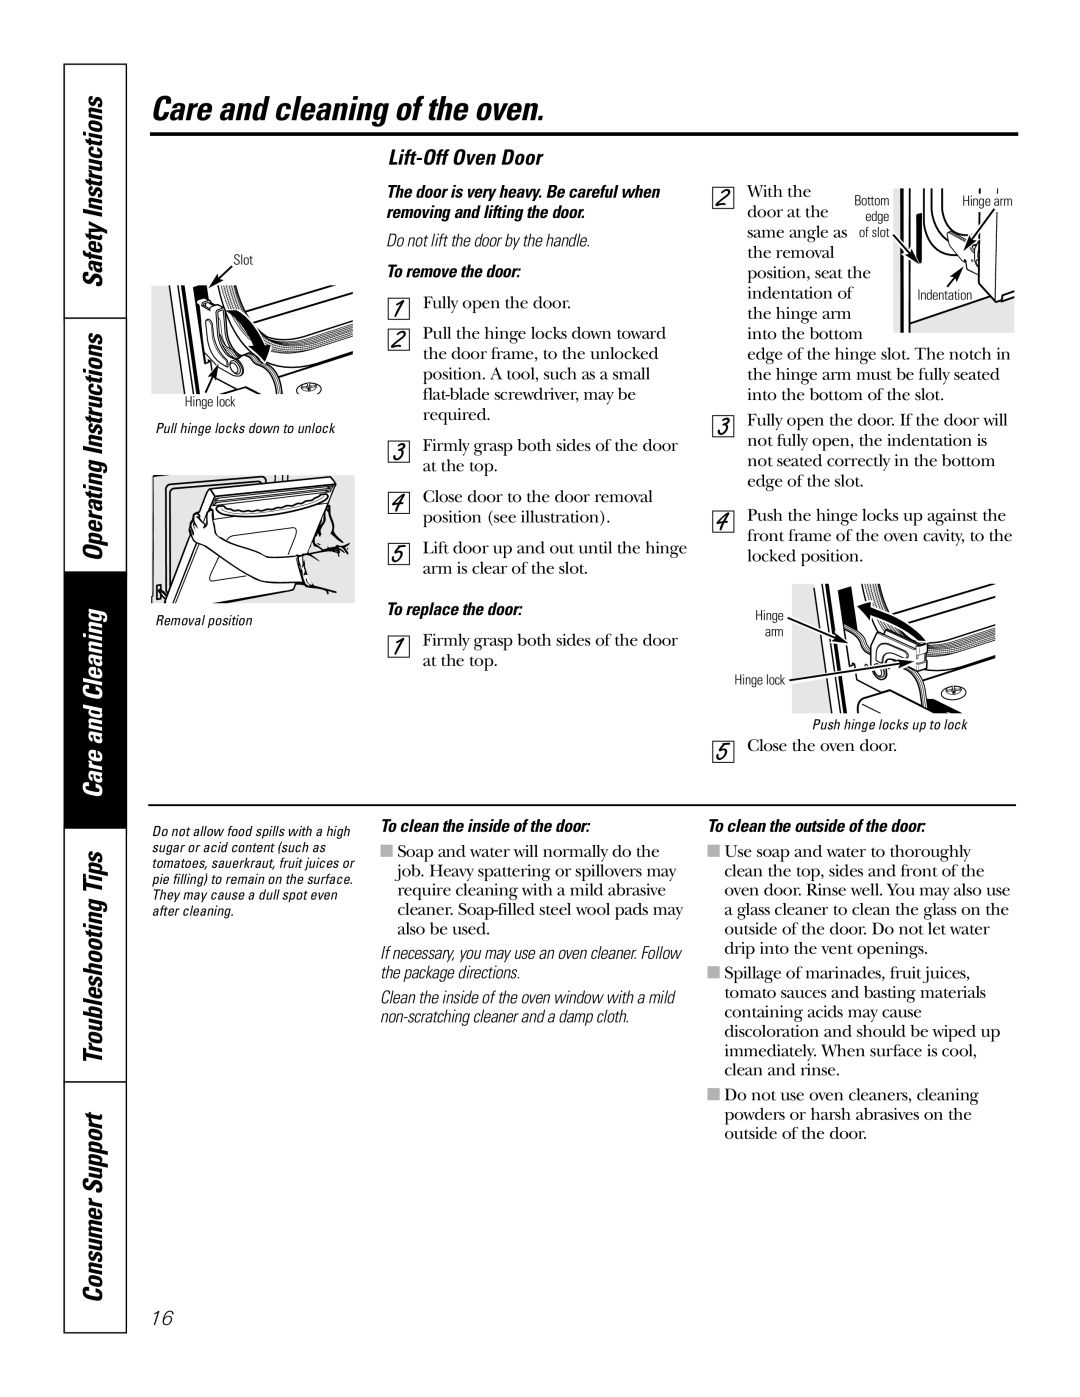 GE JKS1027 owner manual Consumer Support Troubleshooting Tips, Care and Cleaning Operating Instructions Safety Instructions 